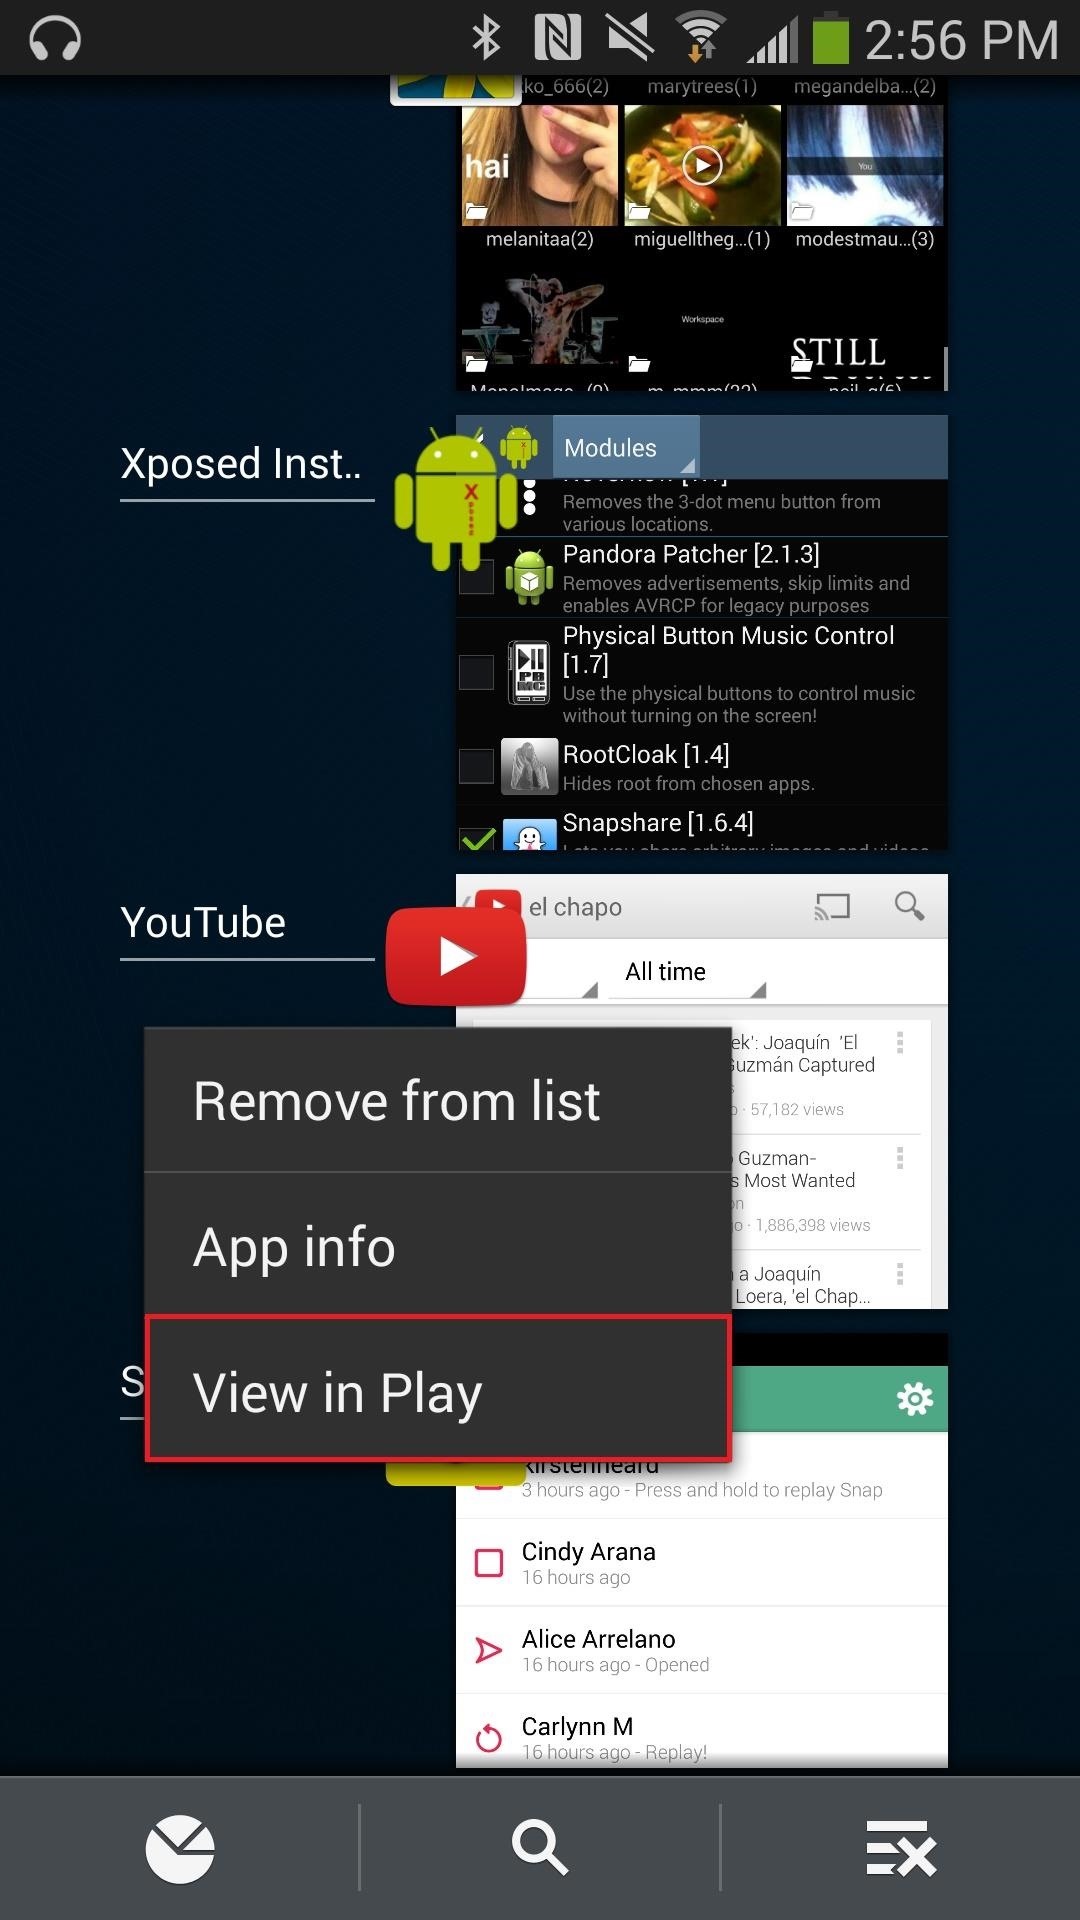 How to View Google Play Pages for Installed Apps Faster on Your Samsung Galaxy Note 3